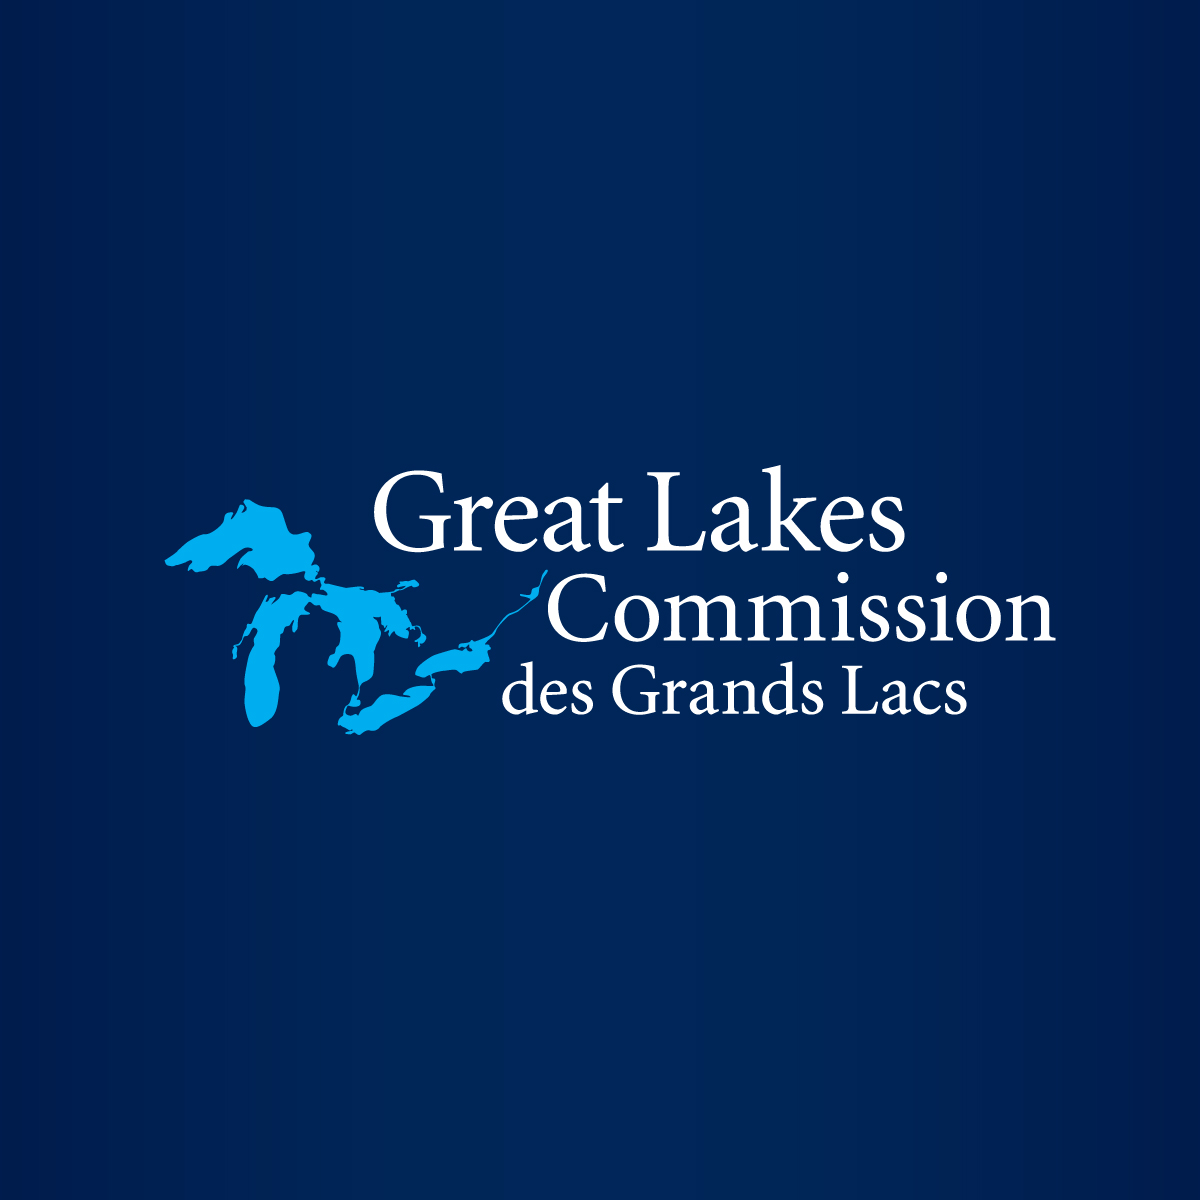 Great Lakes cruises bring passengers, revenue to Muskegon